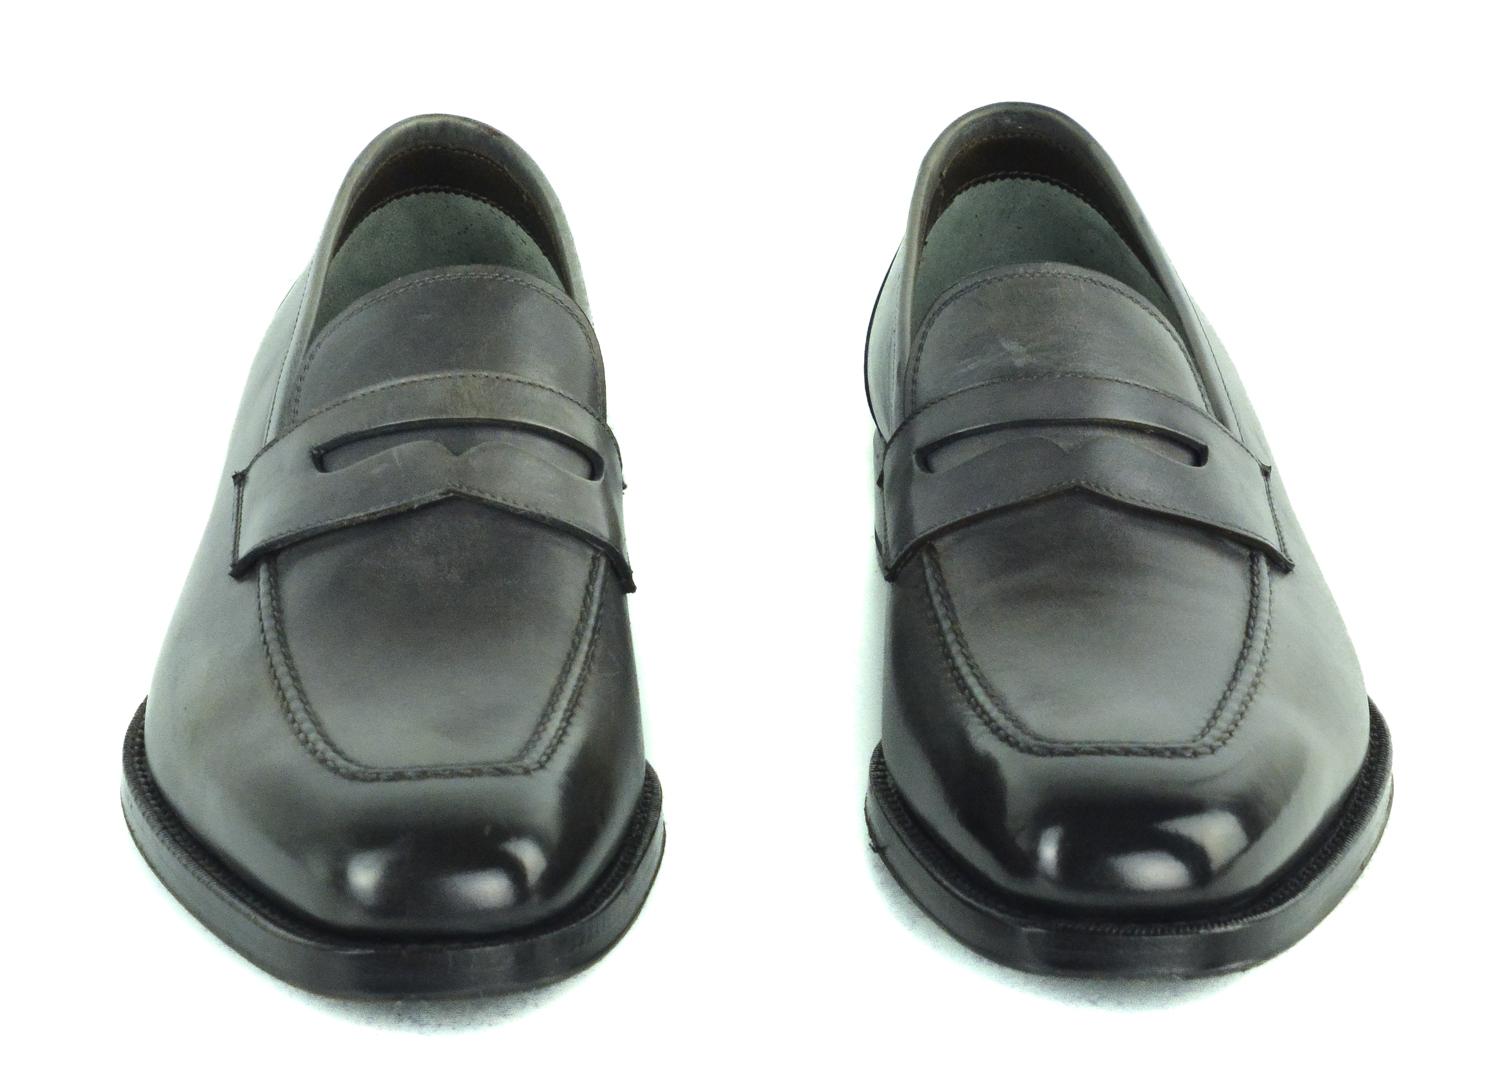 Tom Ford - Sleek and timeless. The number one name in Elegant menswear. These Tom Ford  loafers are presented in sleek leather for an undeniably sophisticated look. Handcrafted in Italy from Austin Calf leather. Fastened with classic laces, they are